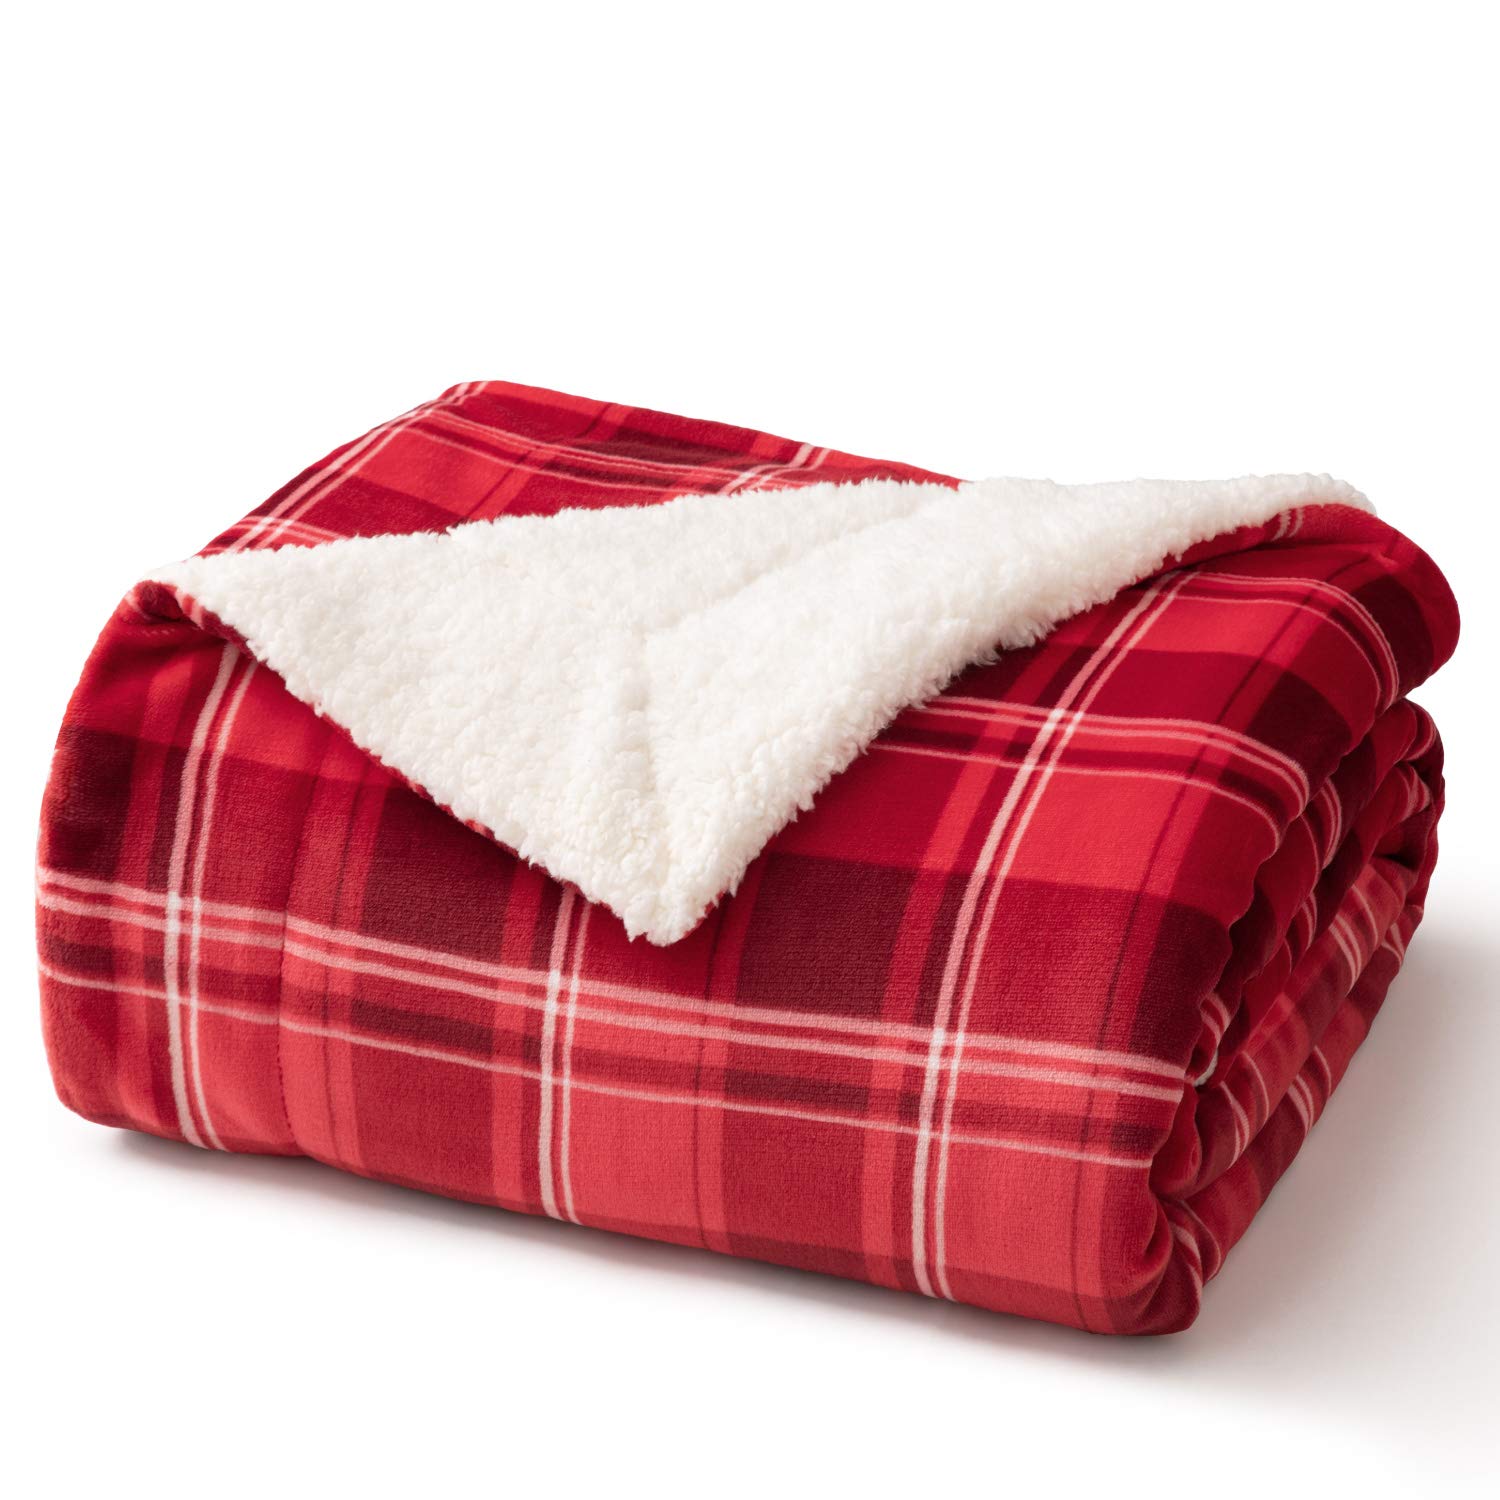 Book Cover Bedsure Sherpa Blanket-Printed-Check-Red AD1 Twin Size US